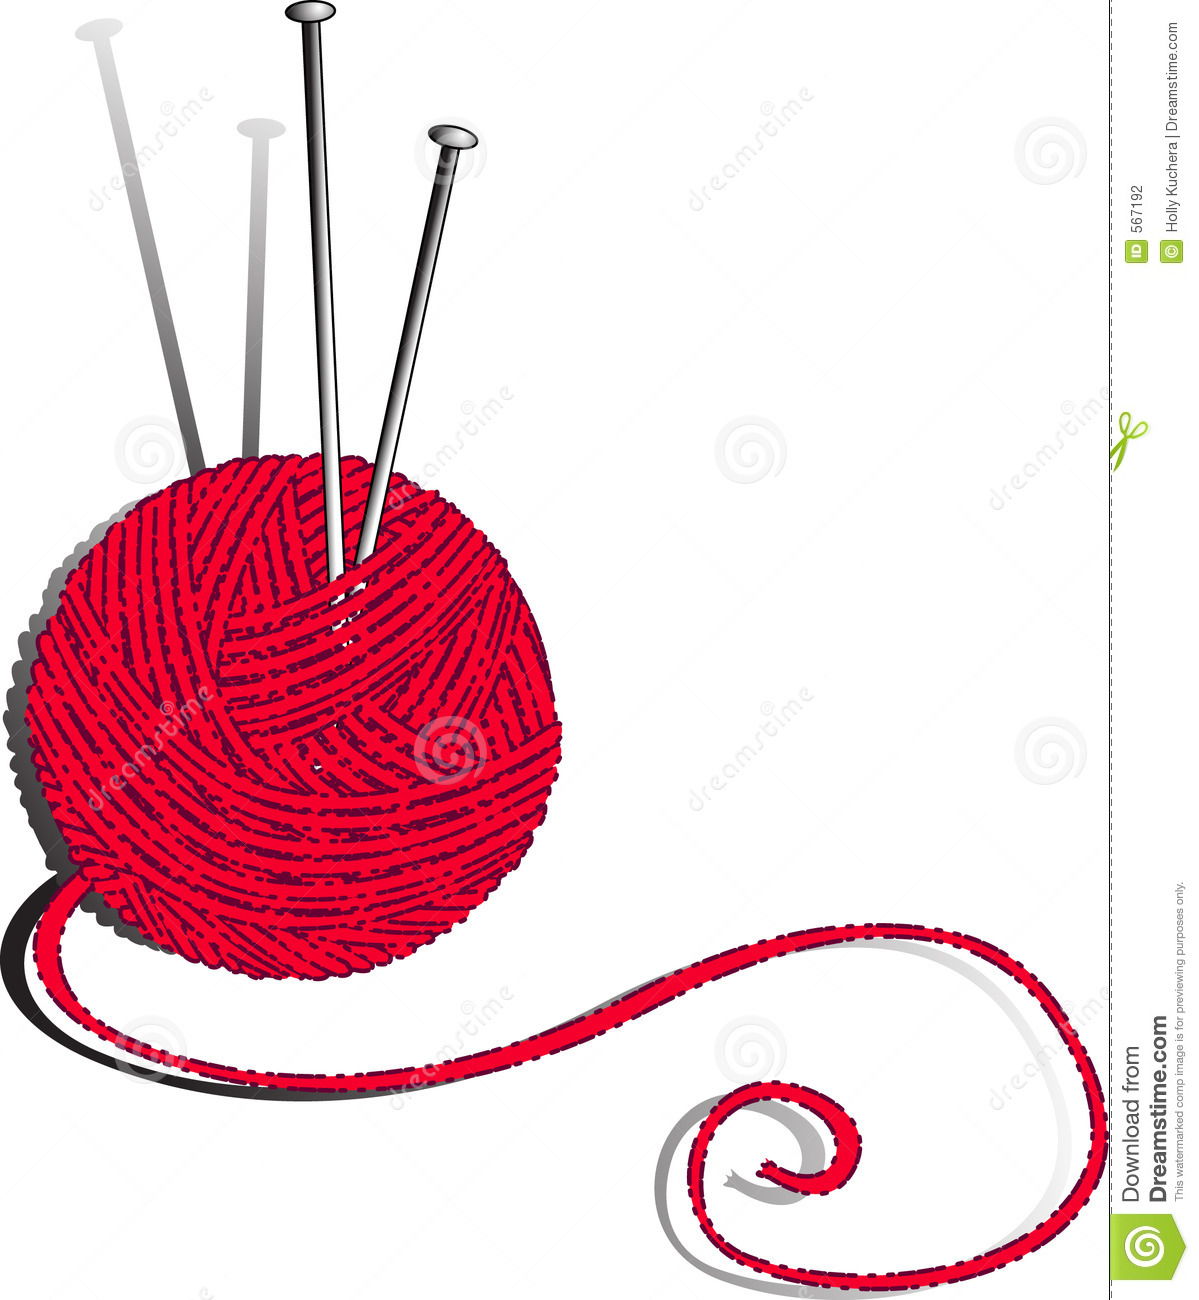 There Is 34 Skein Of Yarn Free Cliparts All Used For Free